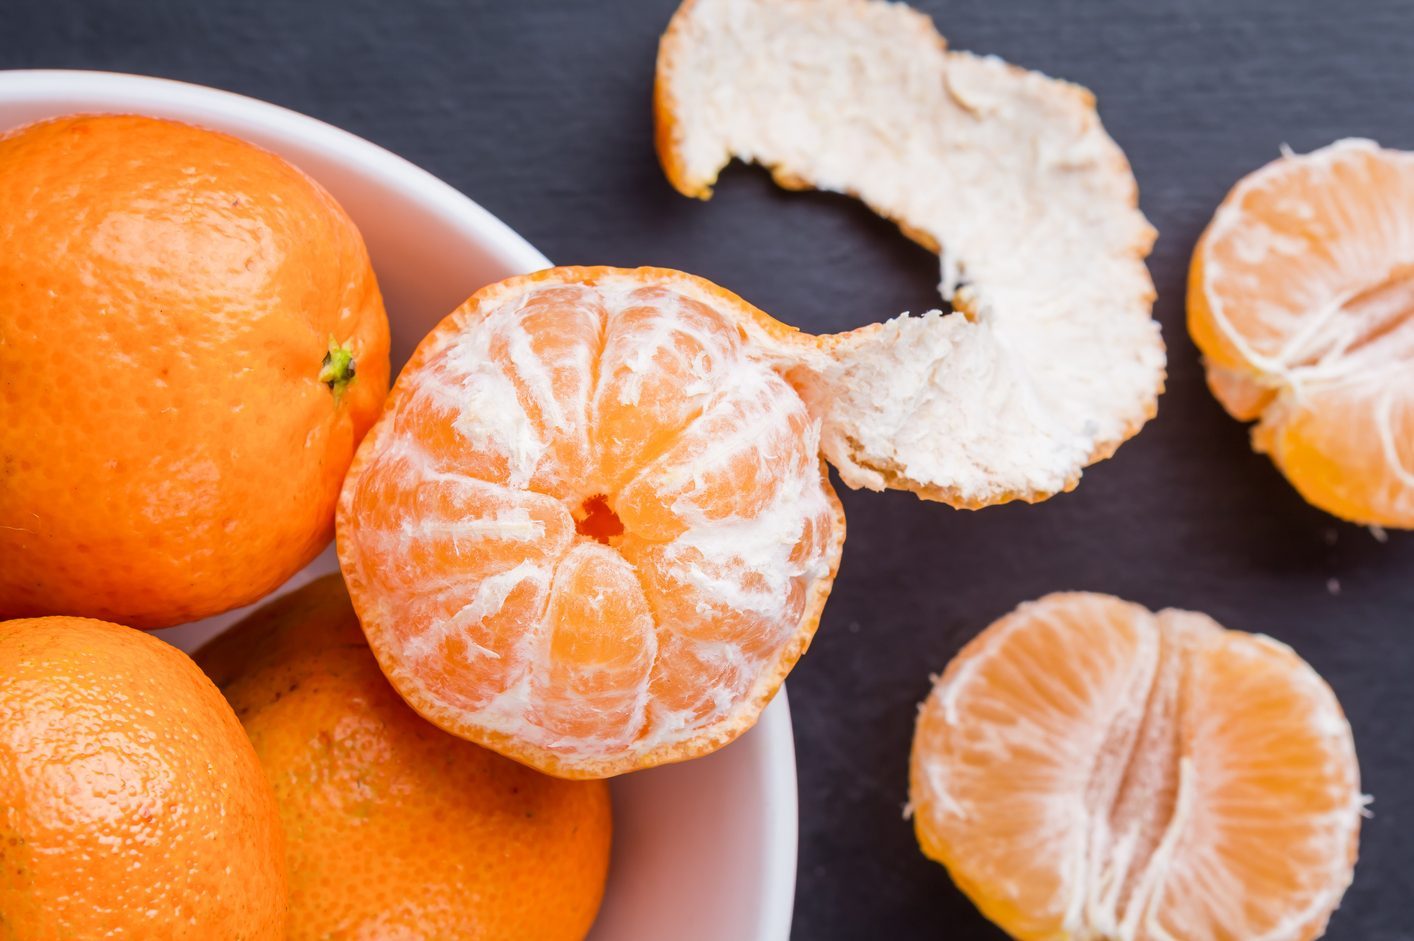 What is Orange Pith and Can You Eat It? | Reader's Digest